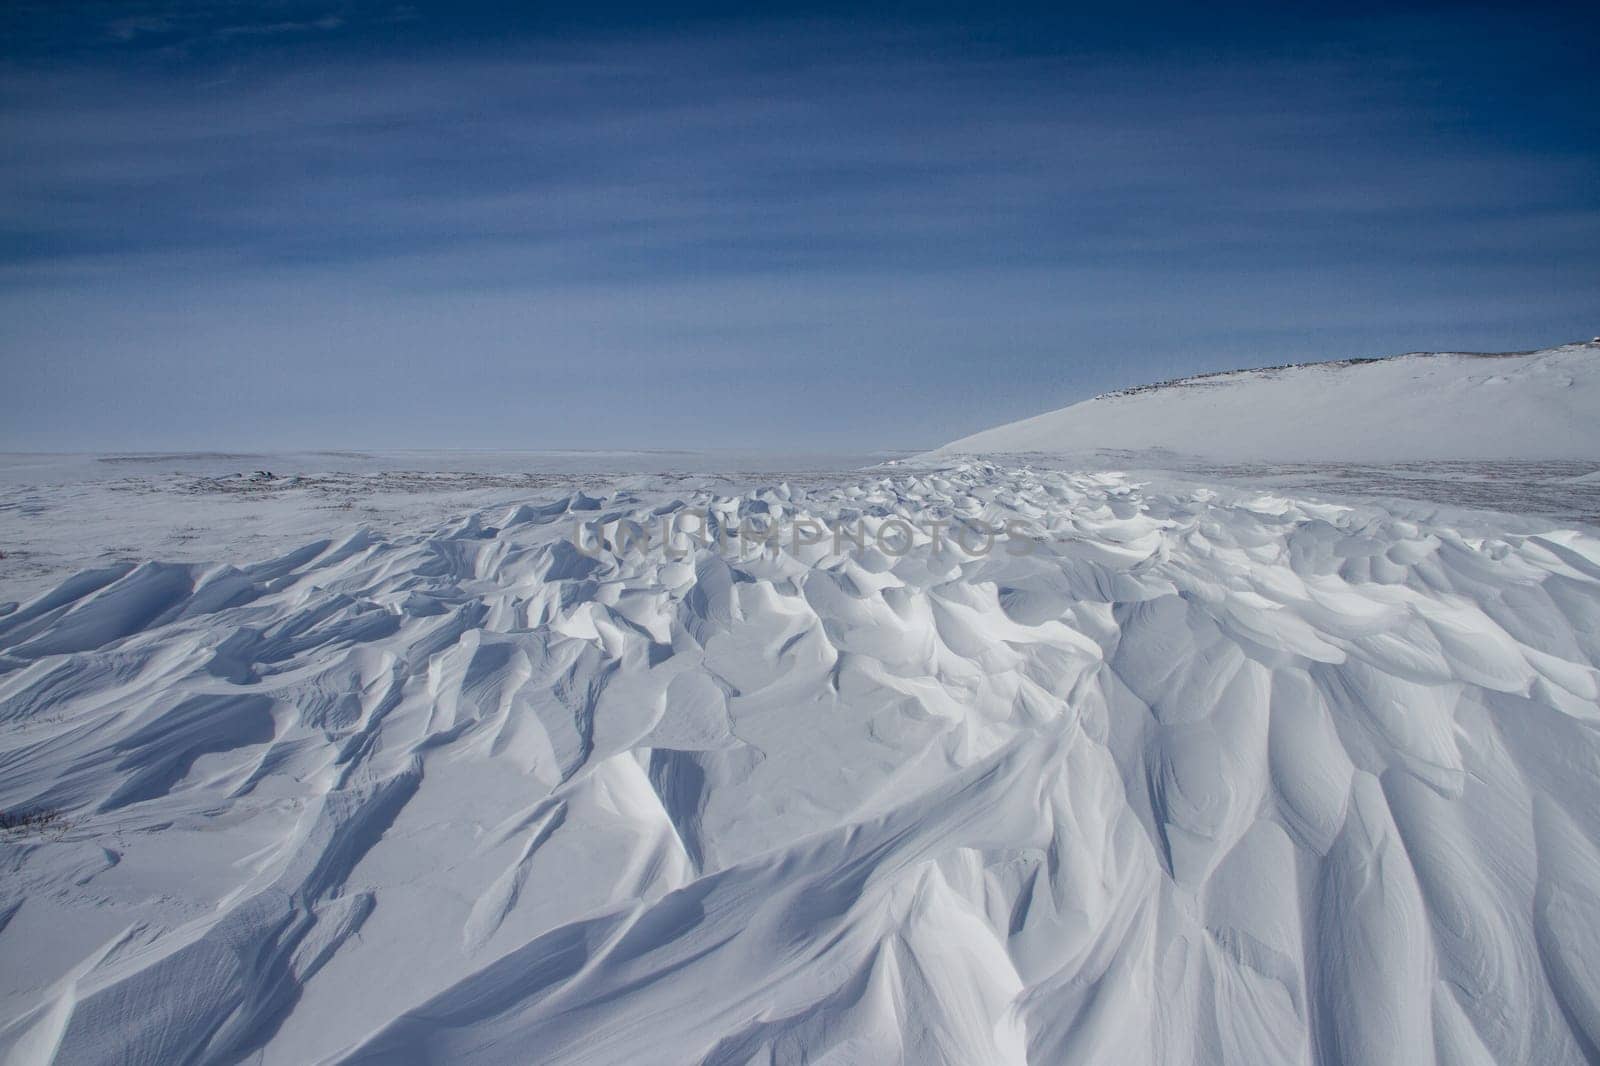 Beautiful patterns of sastrugi, parallel wavelike ridges caused by winds on surface of hard snow, with soft clouds in the sky, near Arviat Nunavut Canada